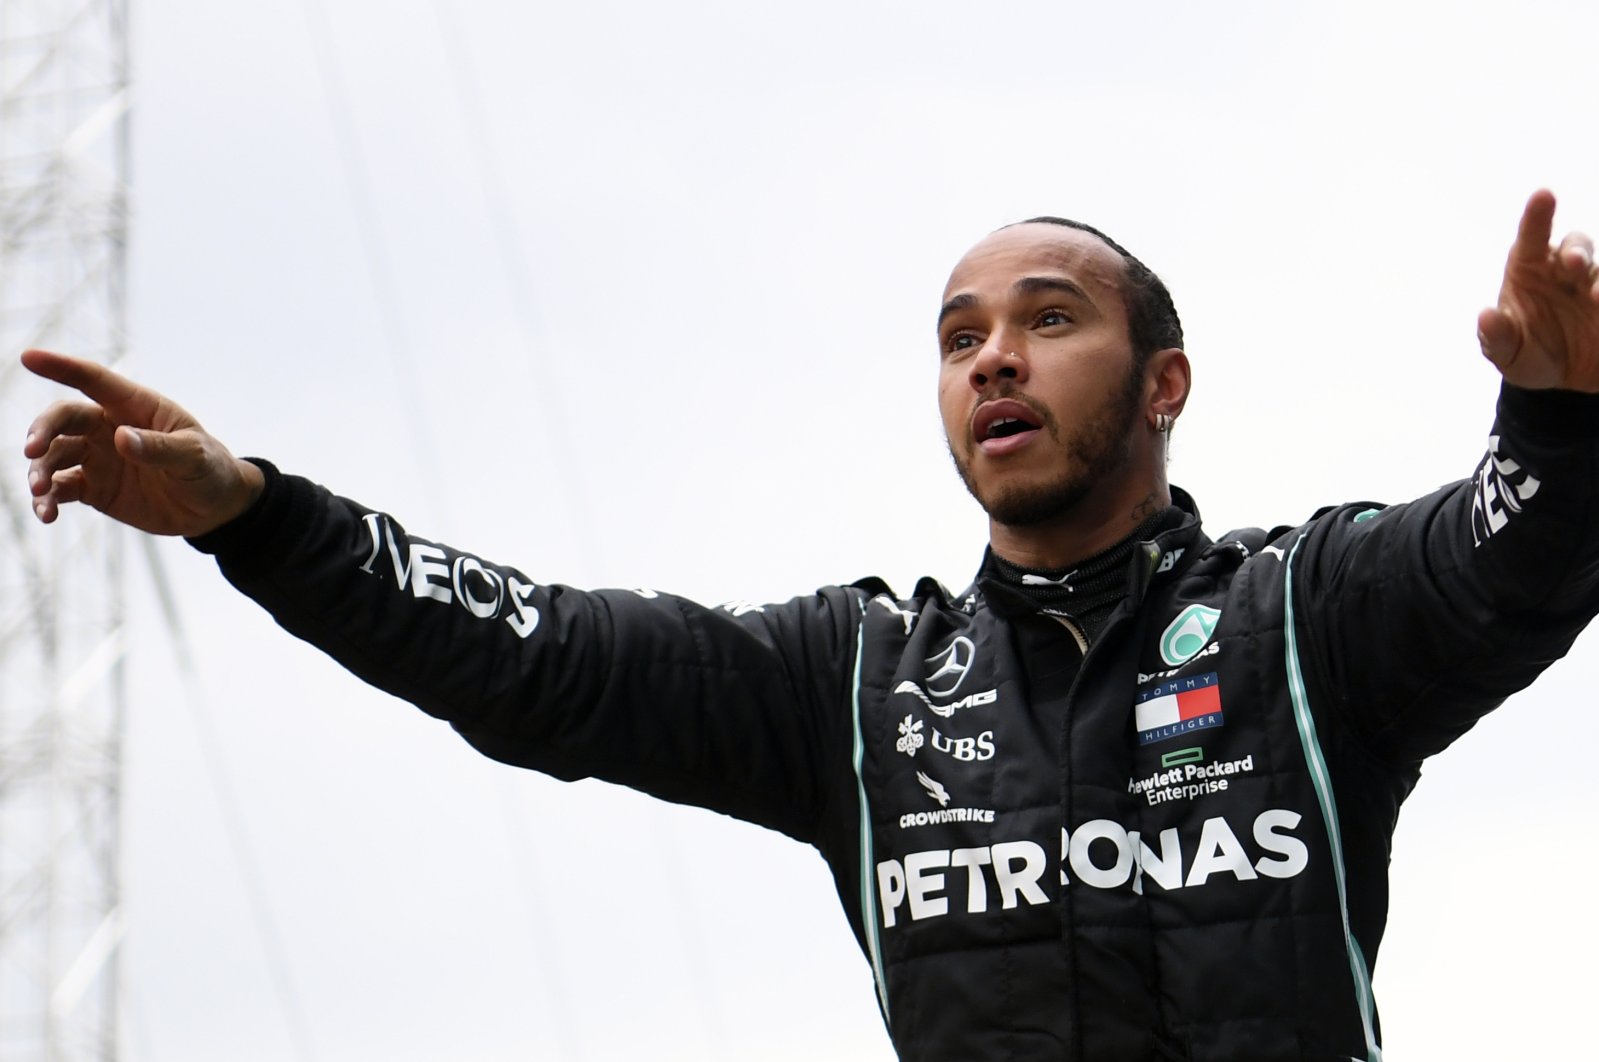 Mercedes driver Lewis Hamilton of Britain celebrates after winning the Turkish Formula One Grand Prix at the Istanbul Park circuit racetrack in Istanbul, Sunday, Nov. 15, 2020. (AP Photo)